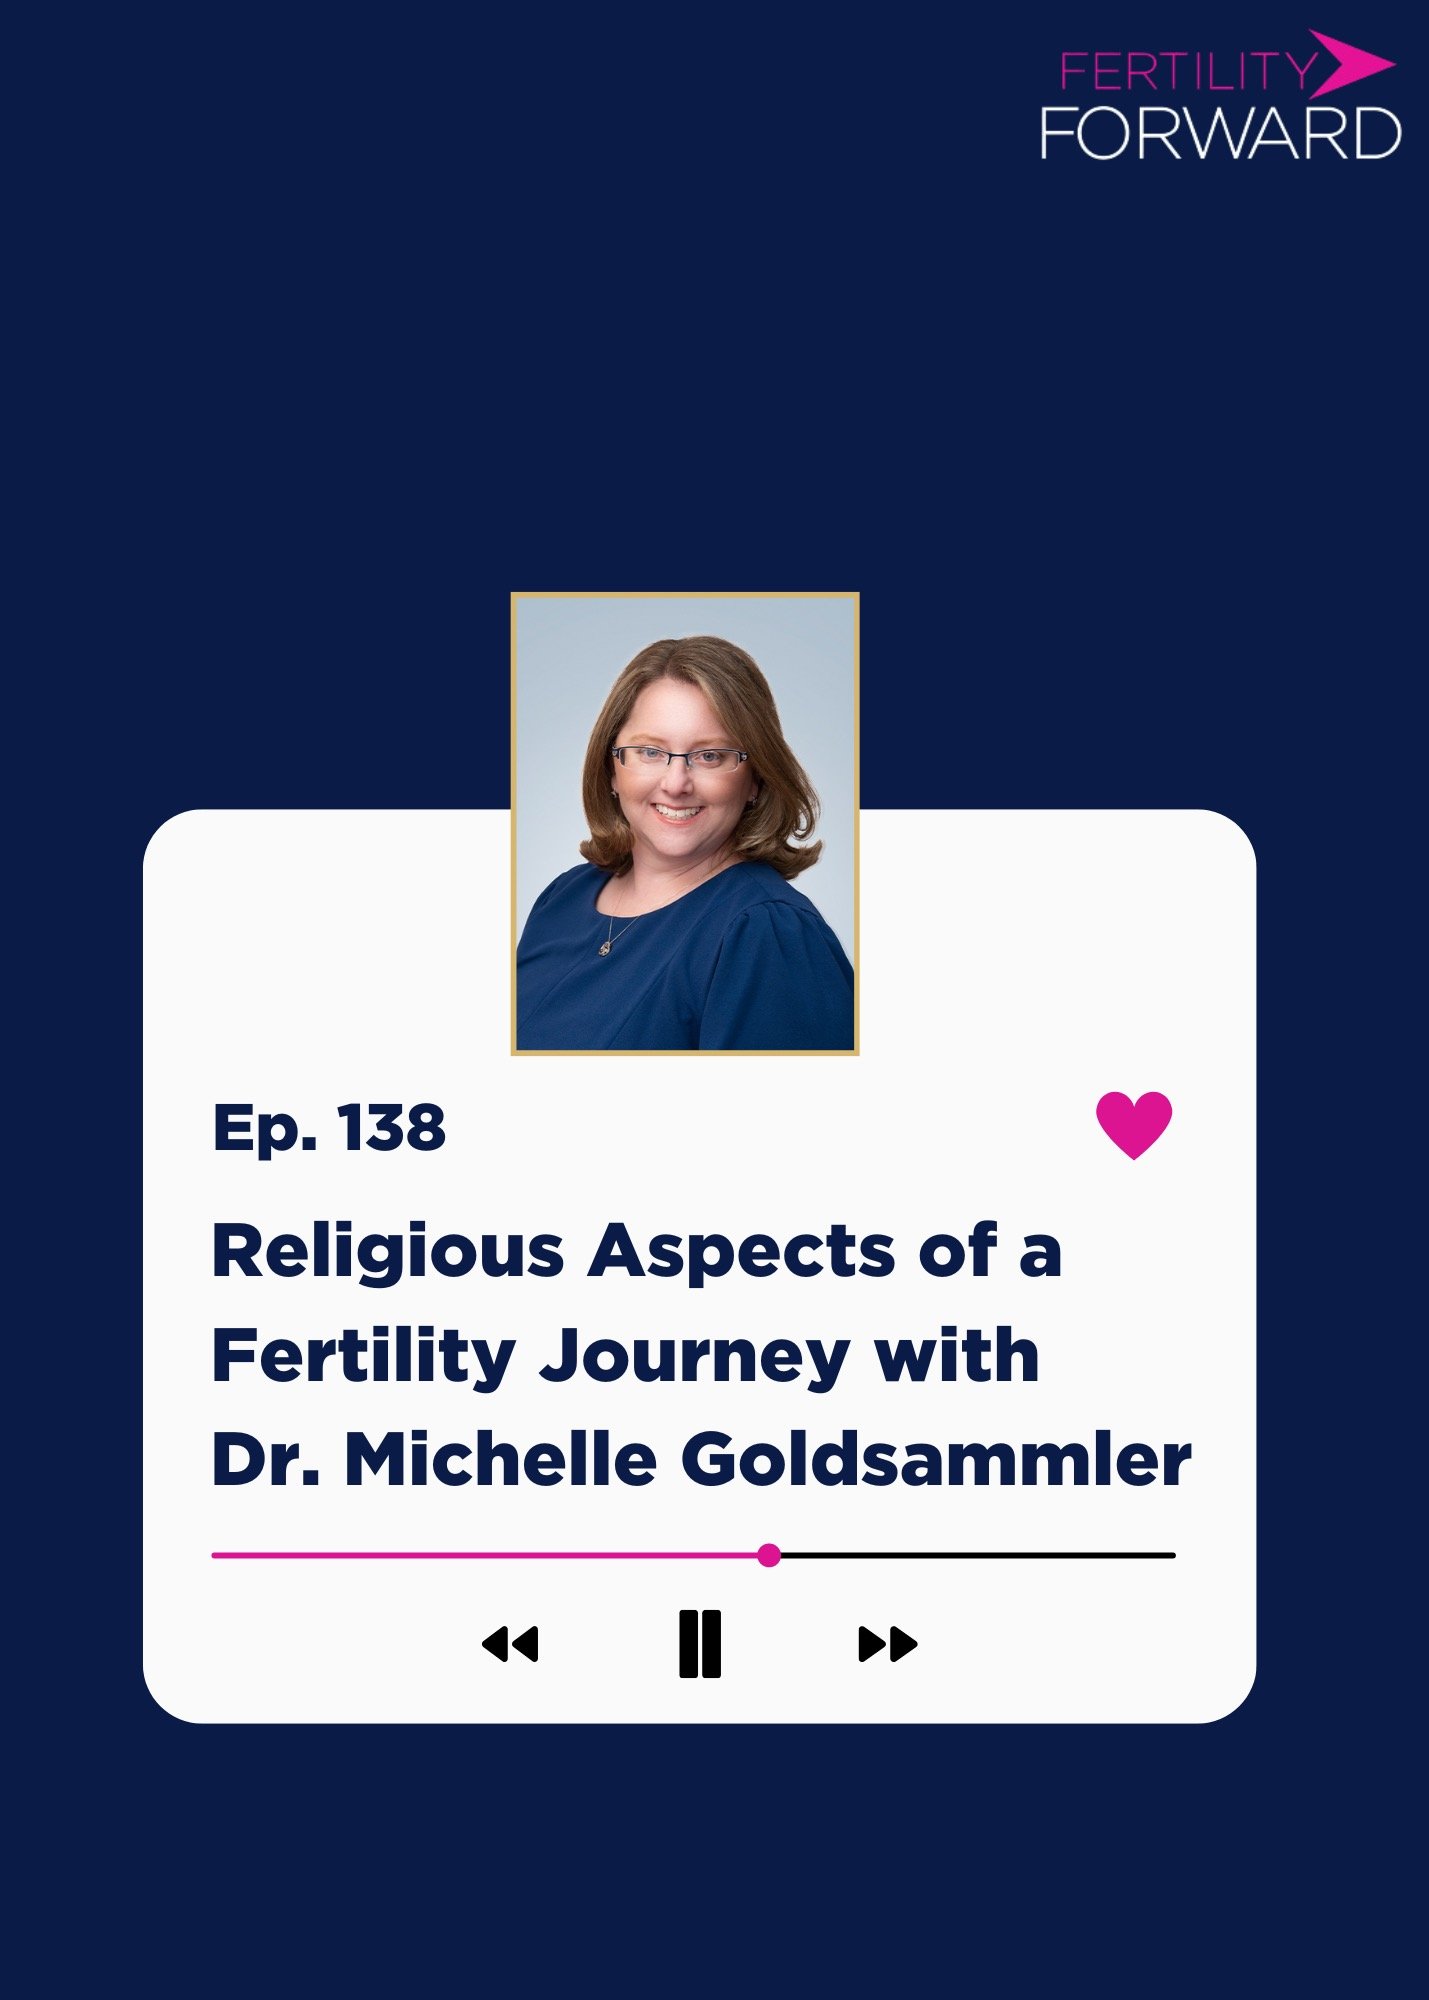 Ep 138: Religious Aspects of a Fertility Journey with Dr. Michelle Goldsammler